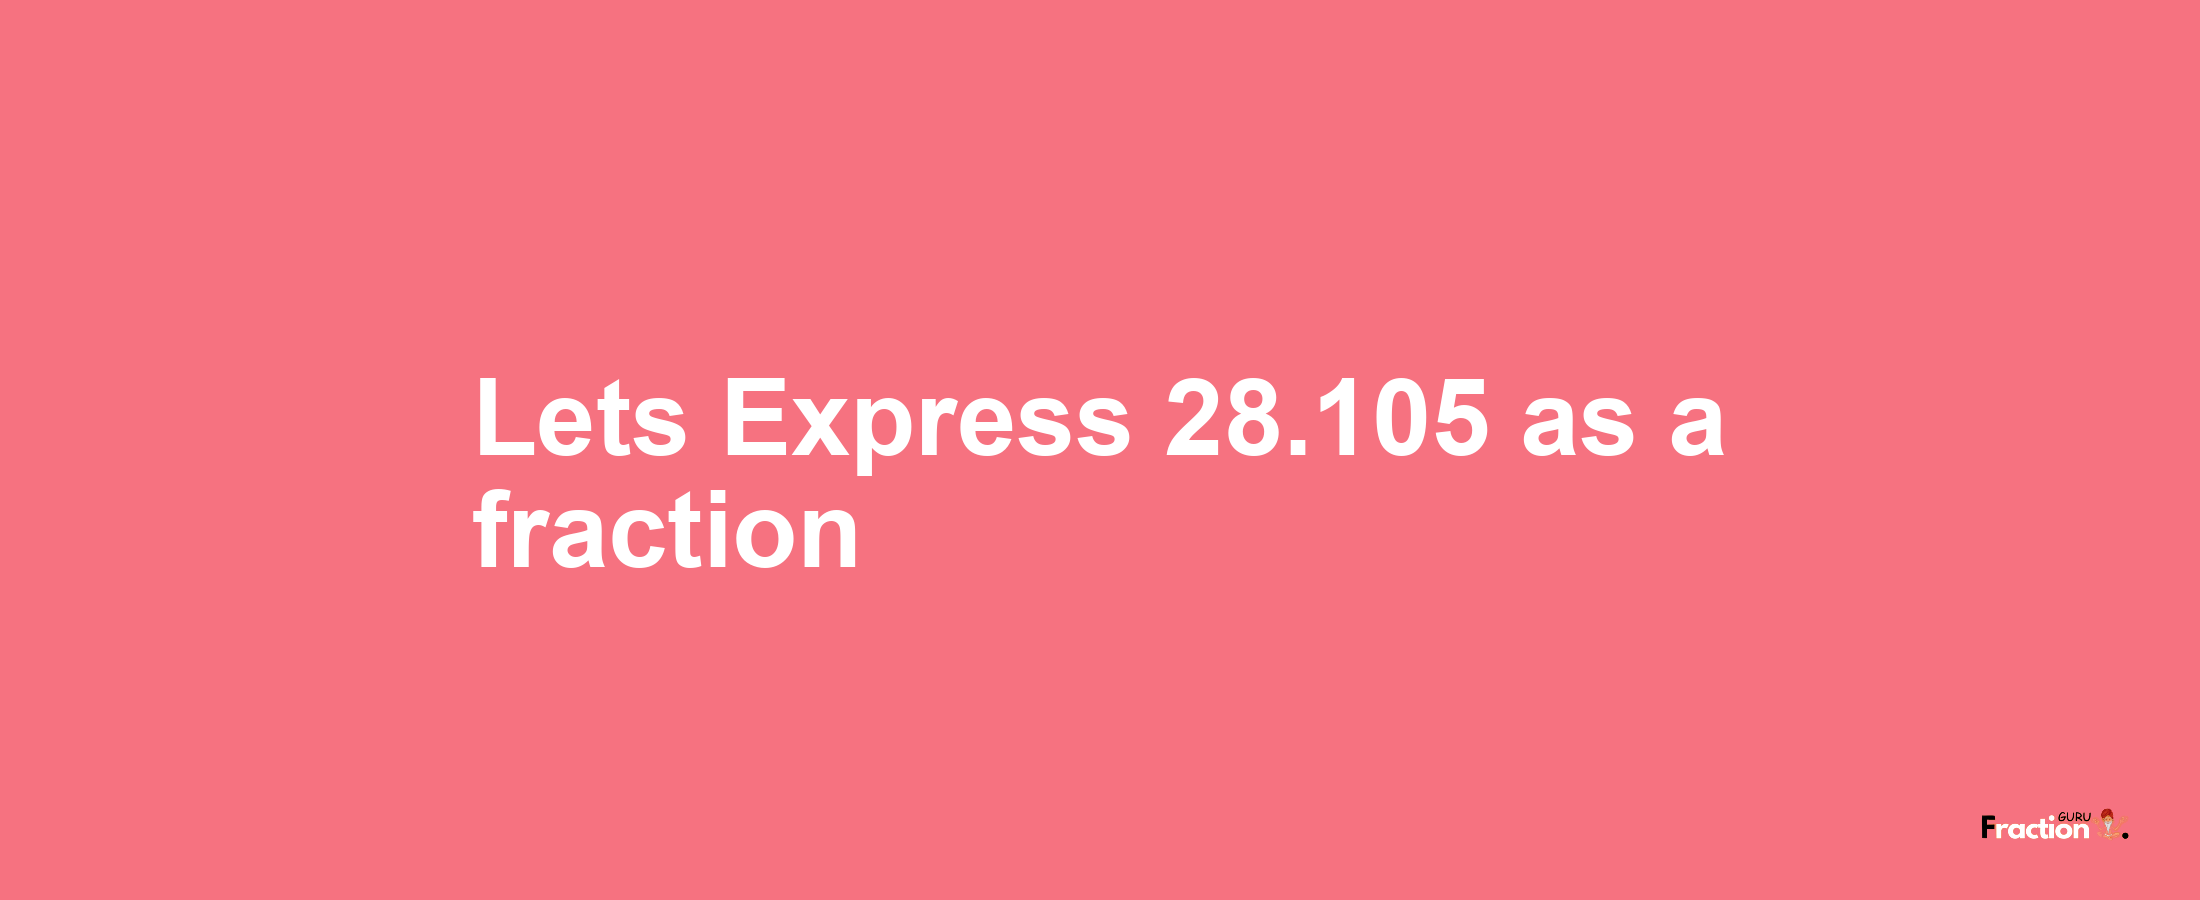 Lets Express 28.105 as afraction